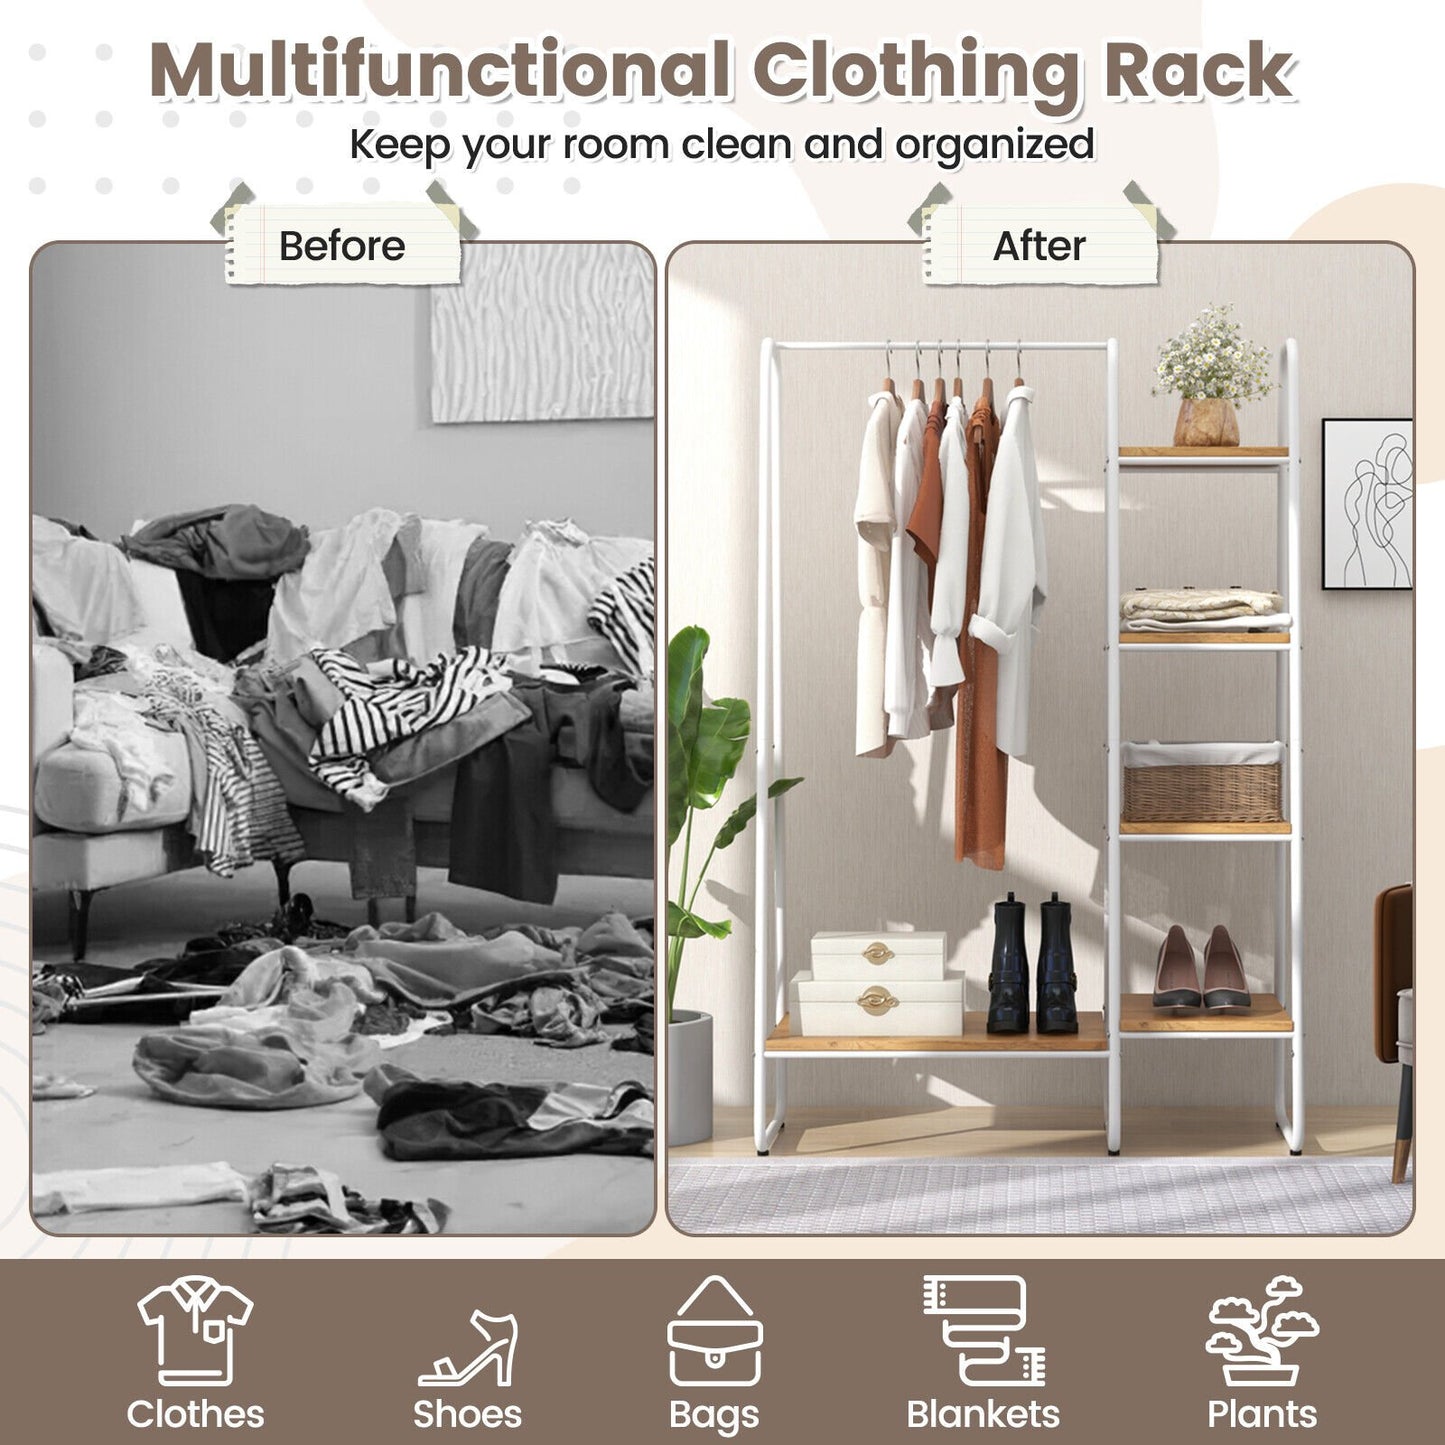 Clothes Rack Free Standing Storage Tower with Metal Frame, Natural